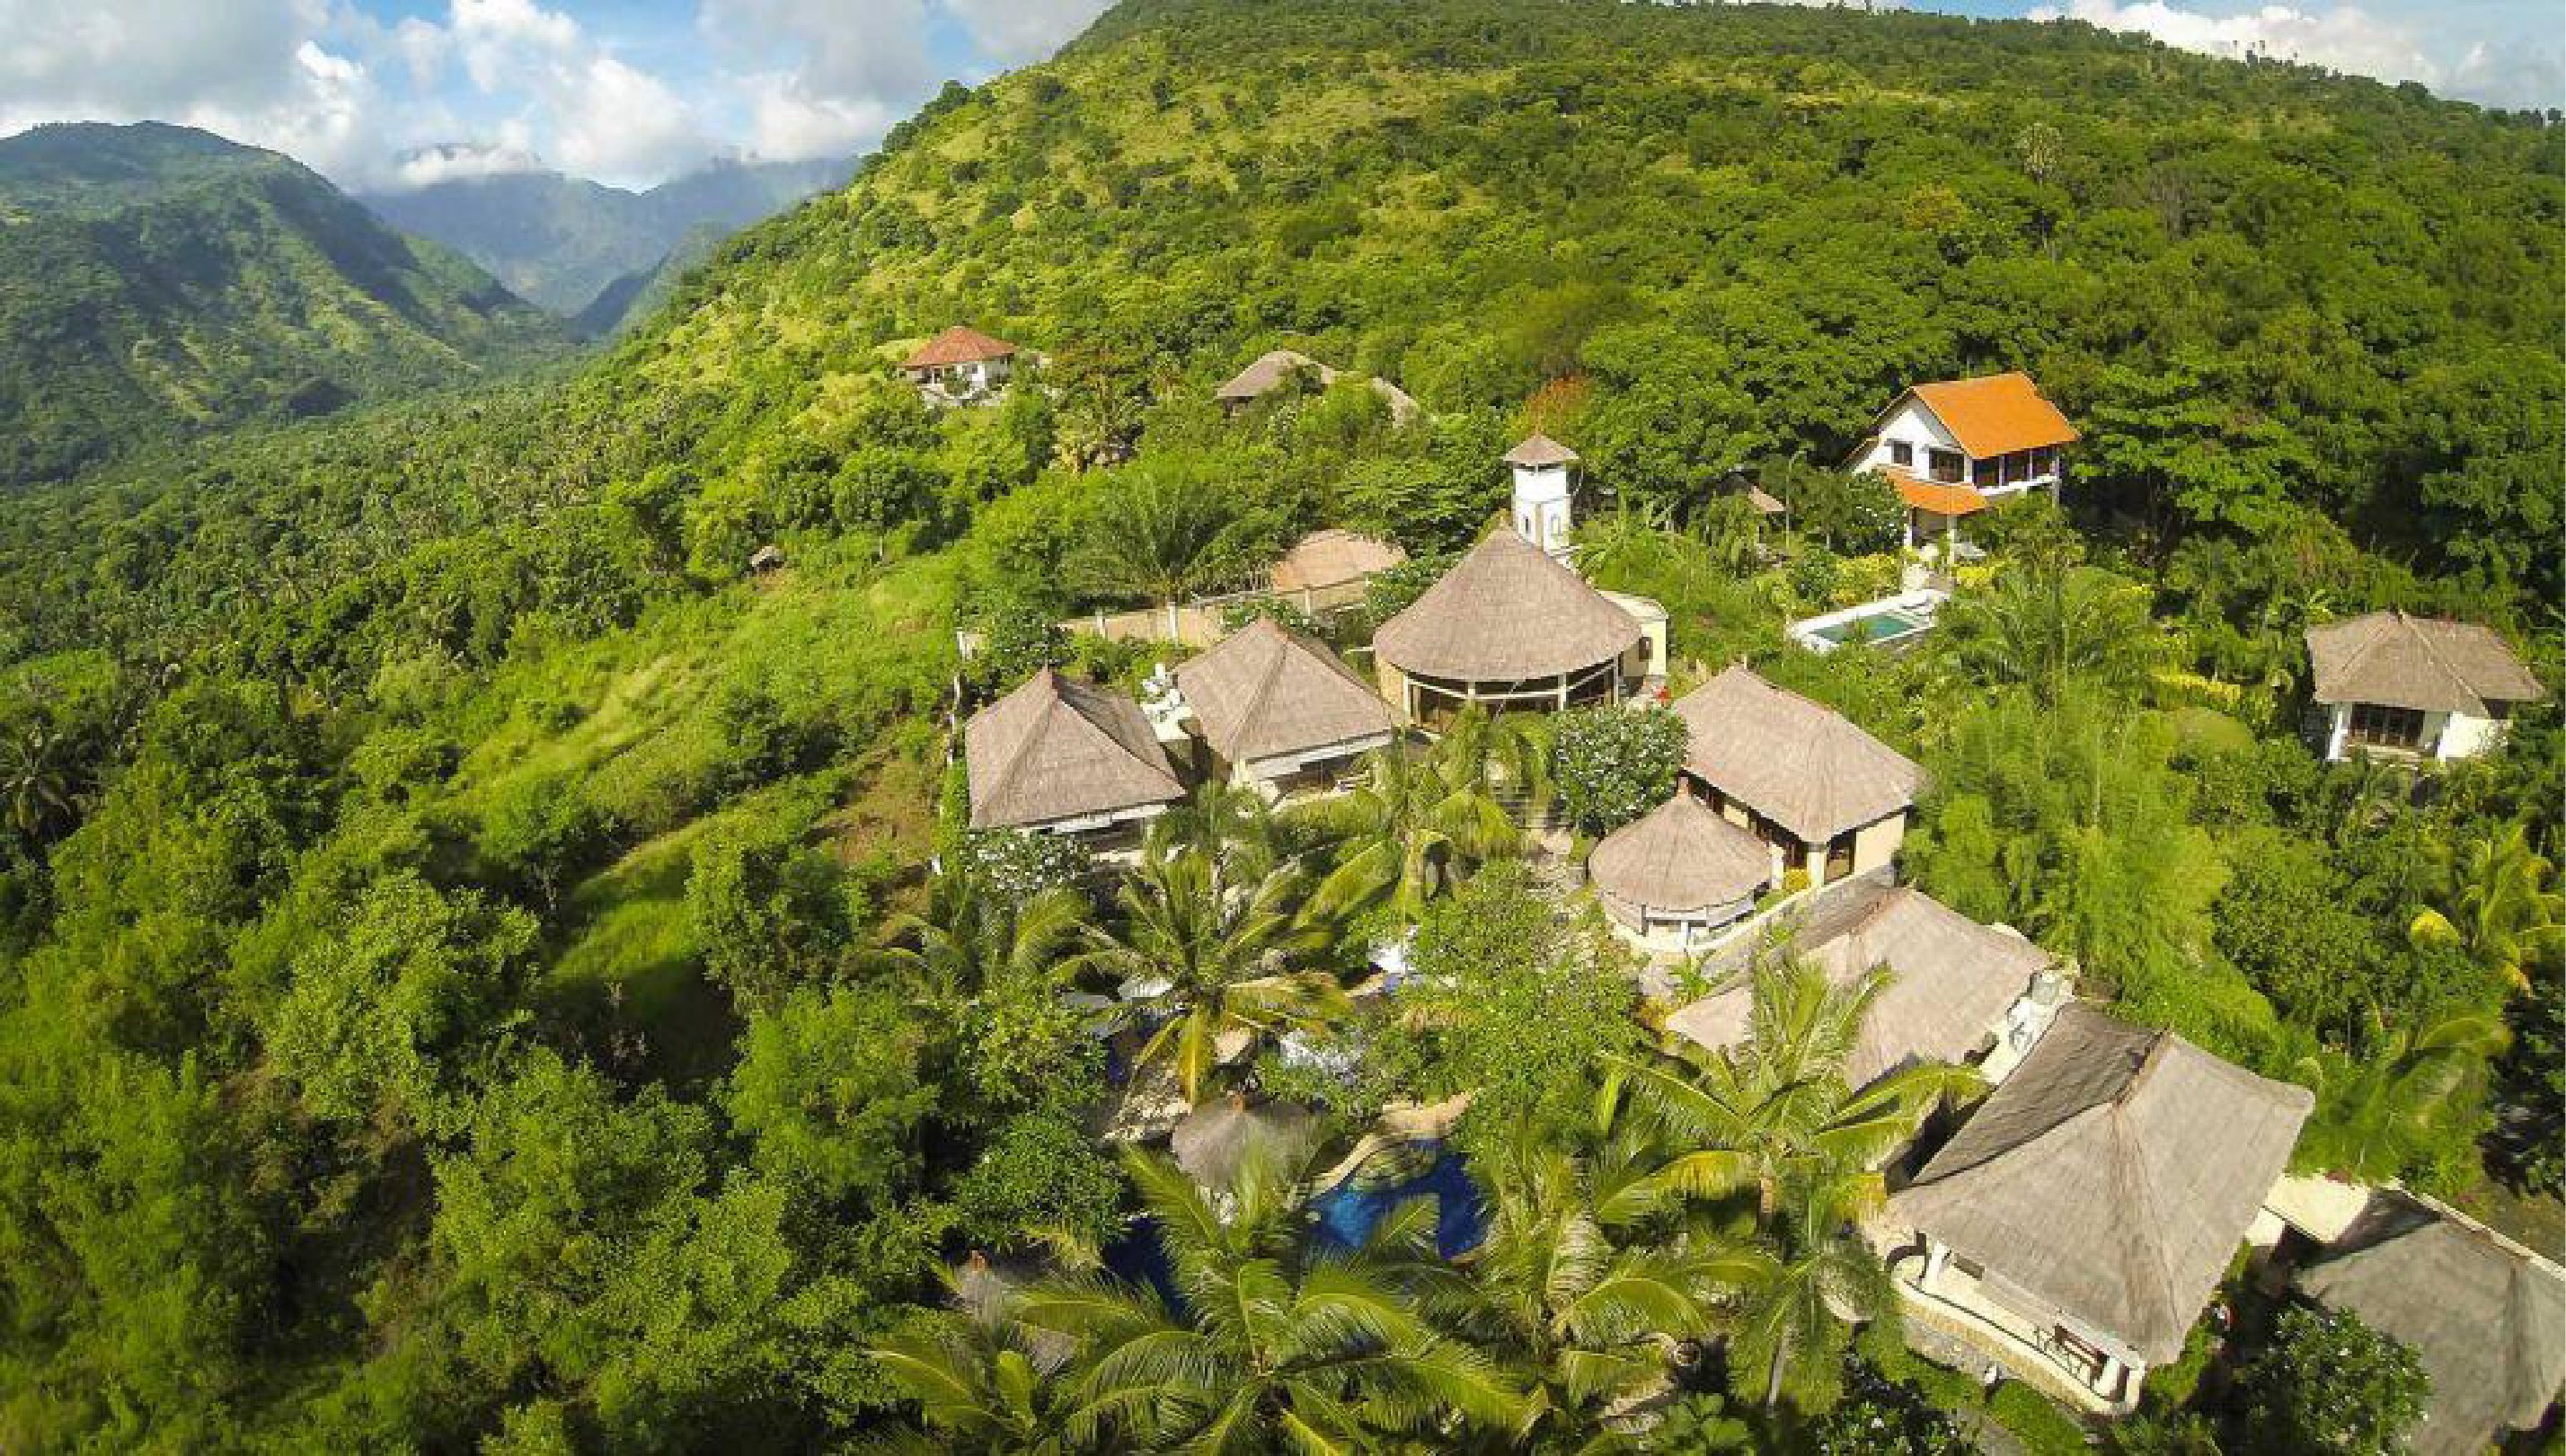 EXOTIC BALI FOR TWO